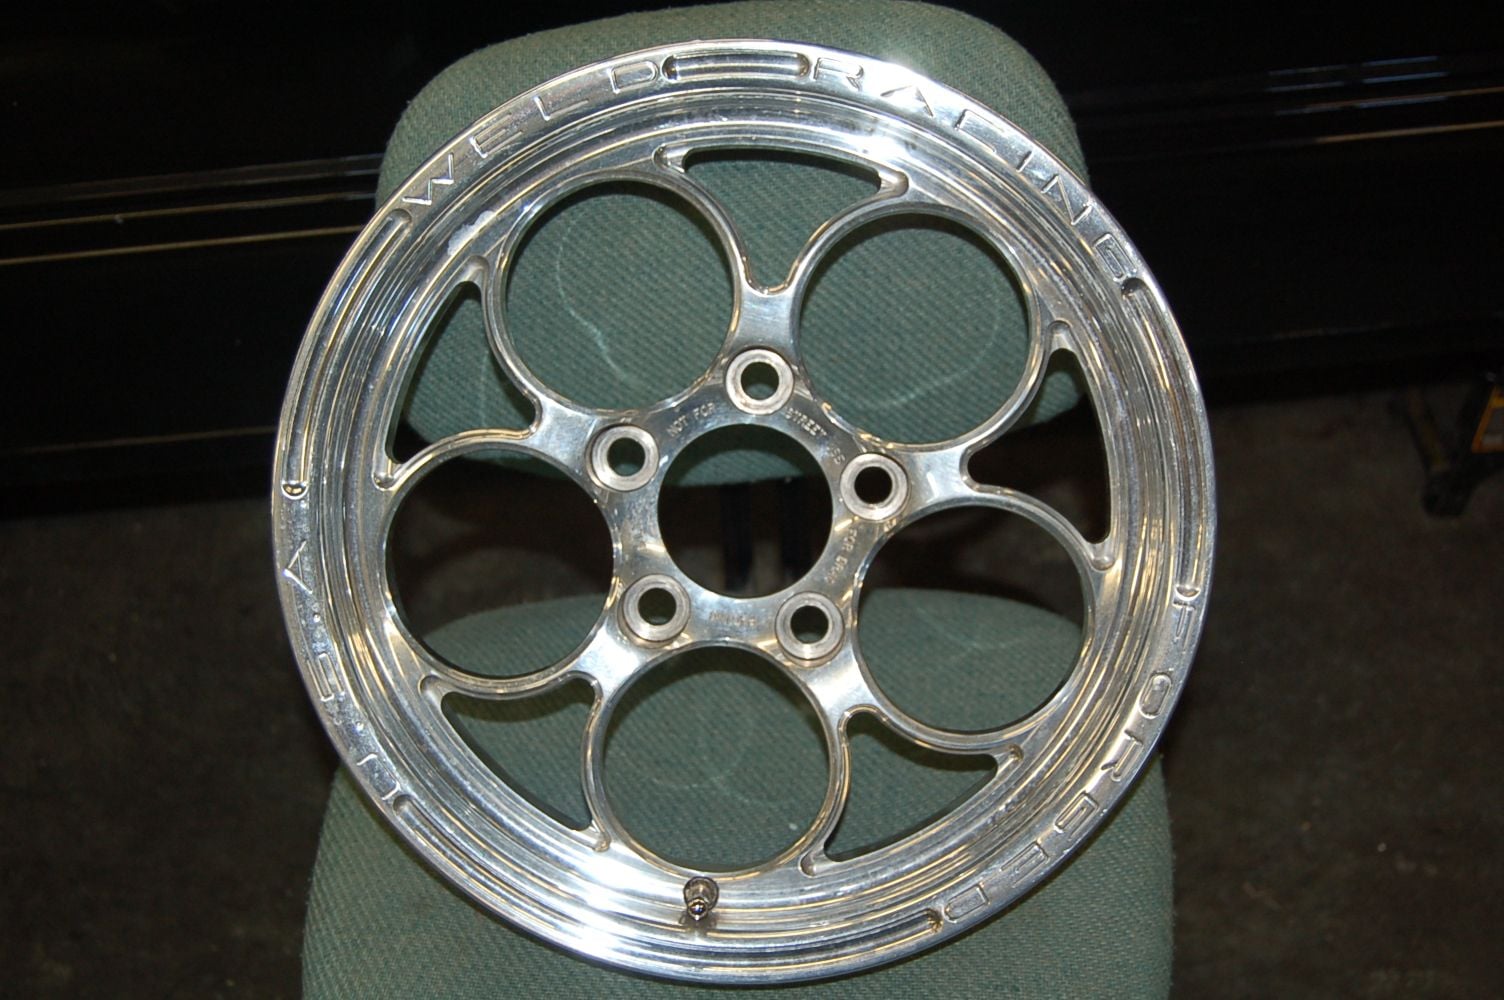  - Weld racing magnum 2.0 drag racing wheels gm bolt pattern - Carlinville, IL 62626, United States